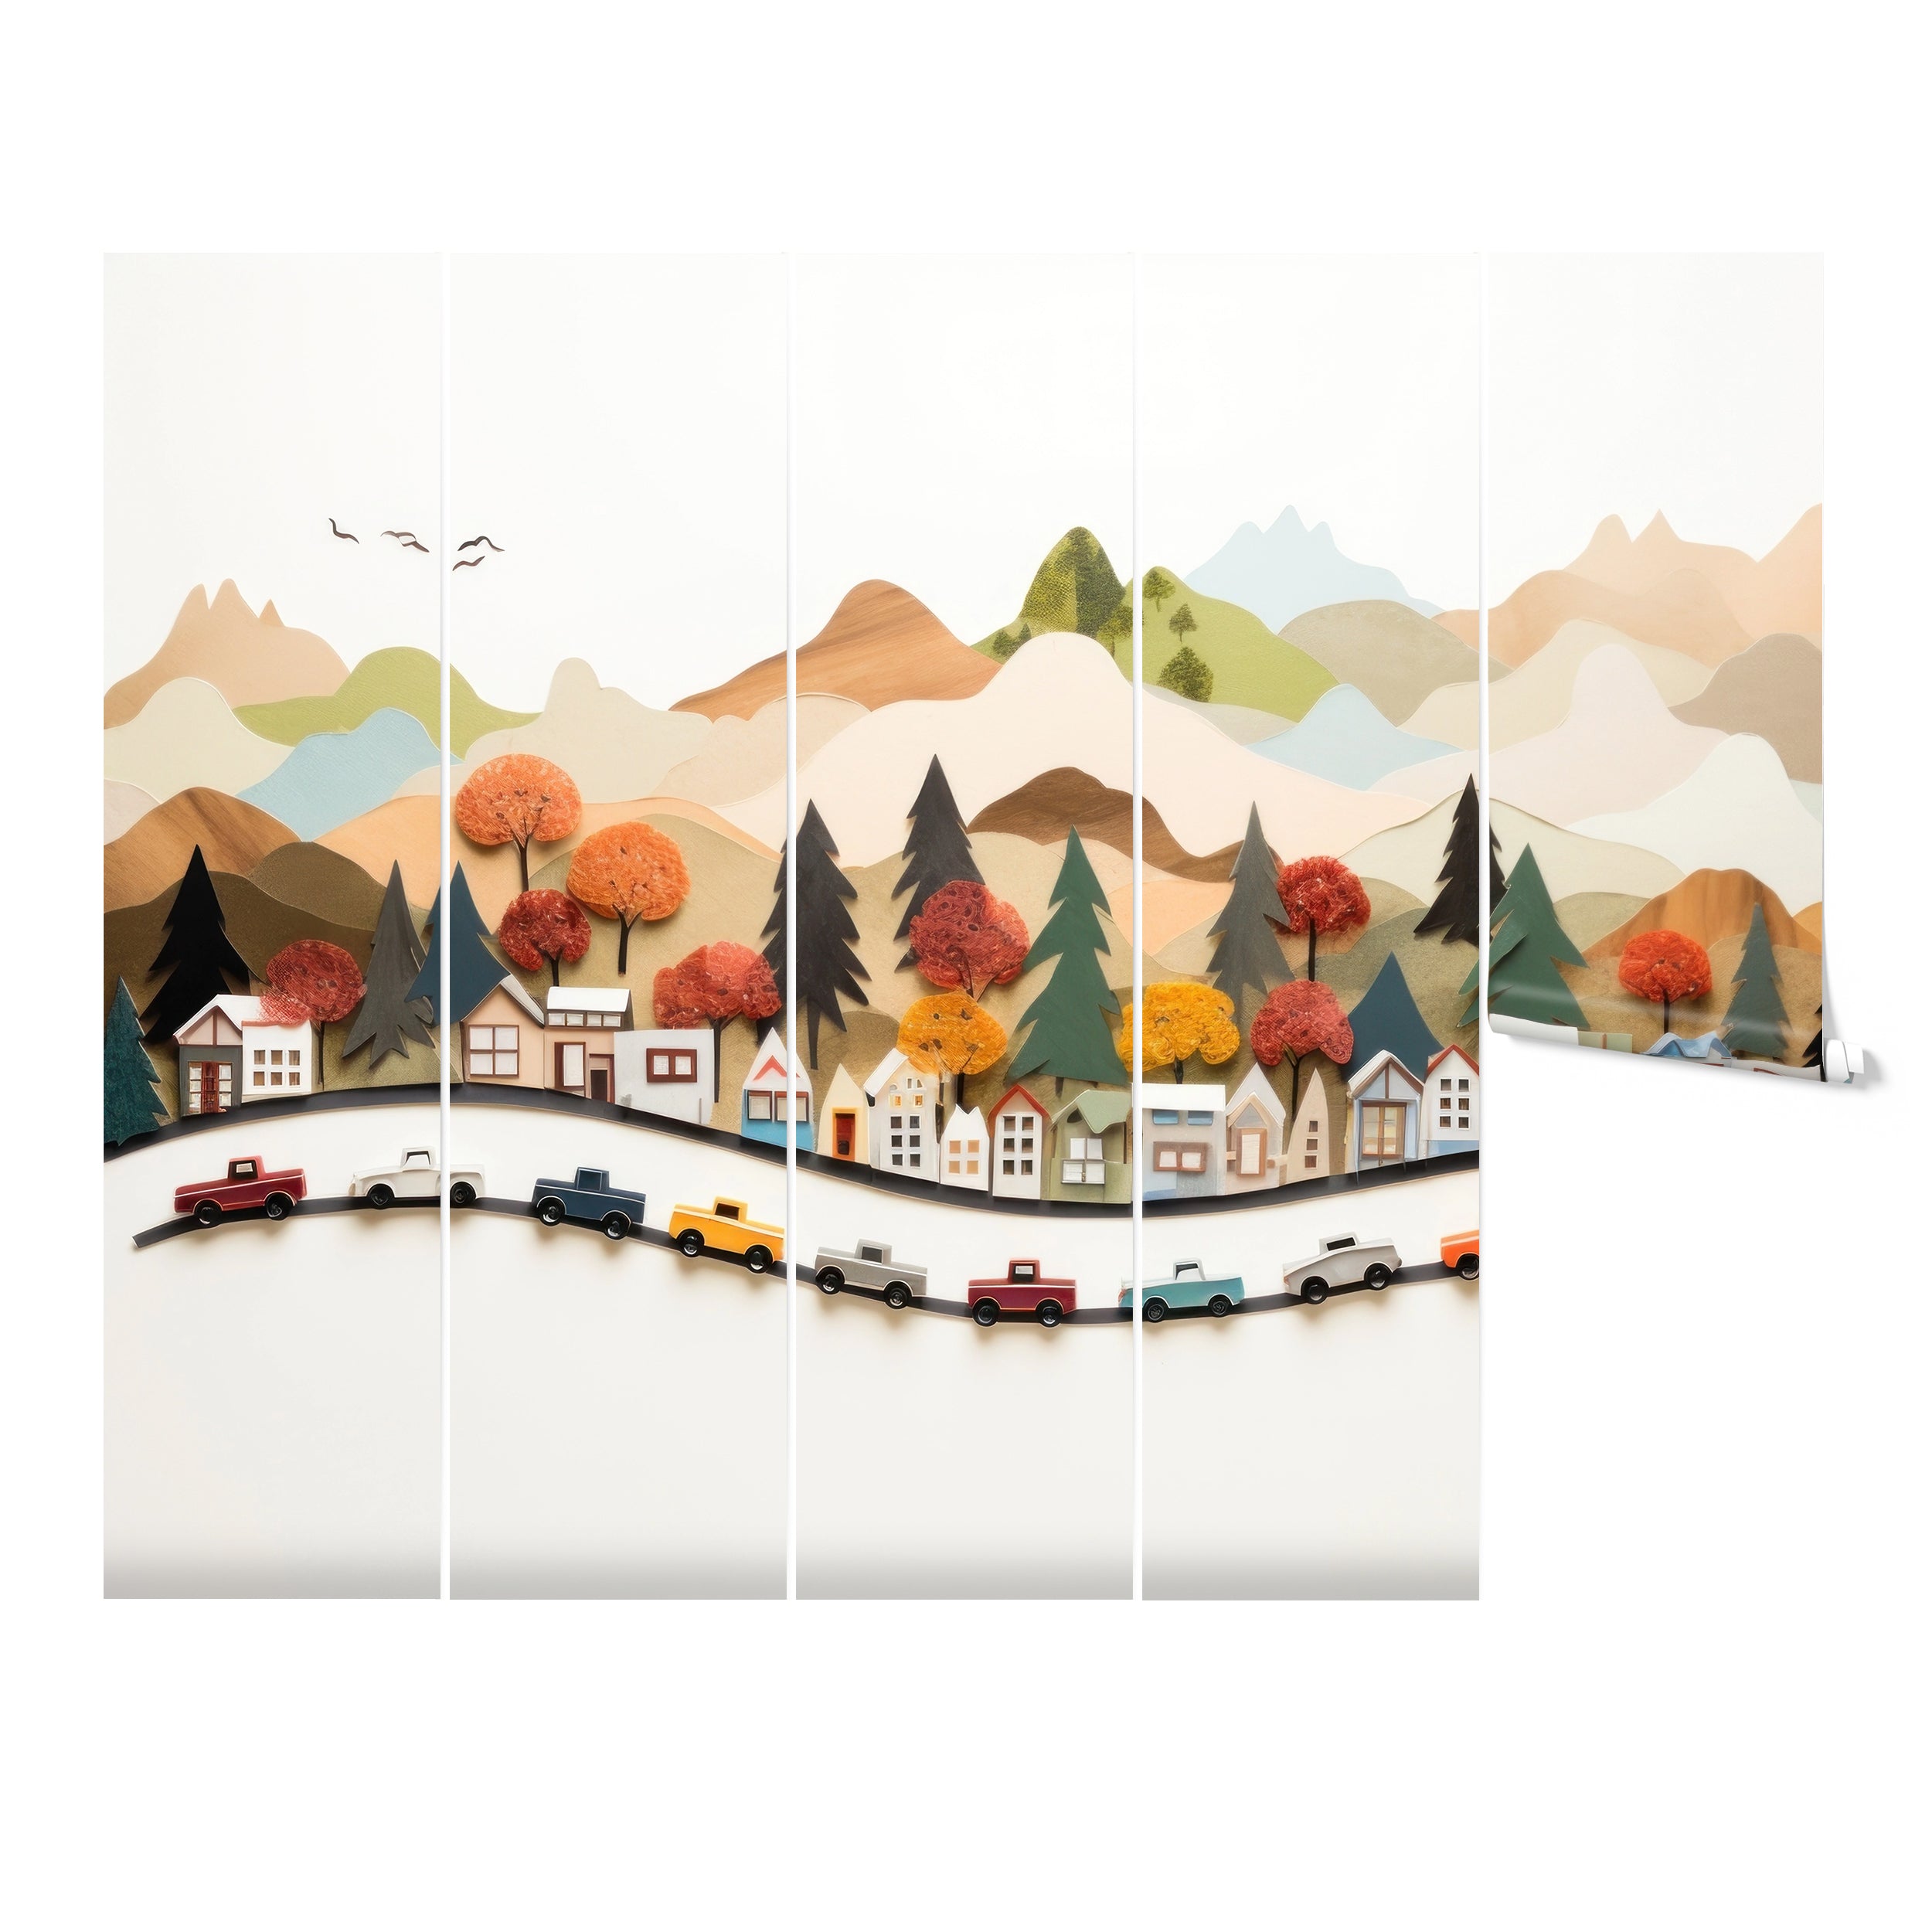 Rolled wallpaper displaying parts of a 'Craft Car Mural' with colorful autumn trees and a picturesque village landscape